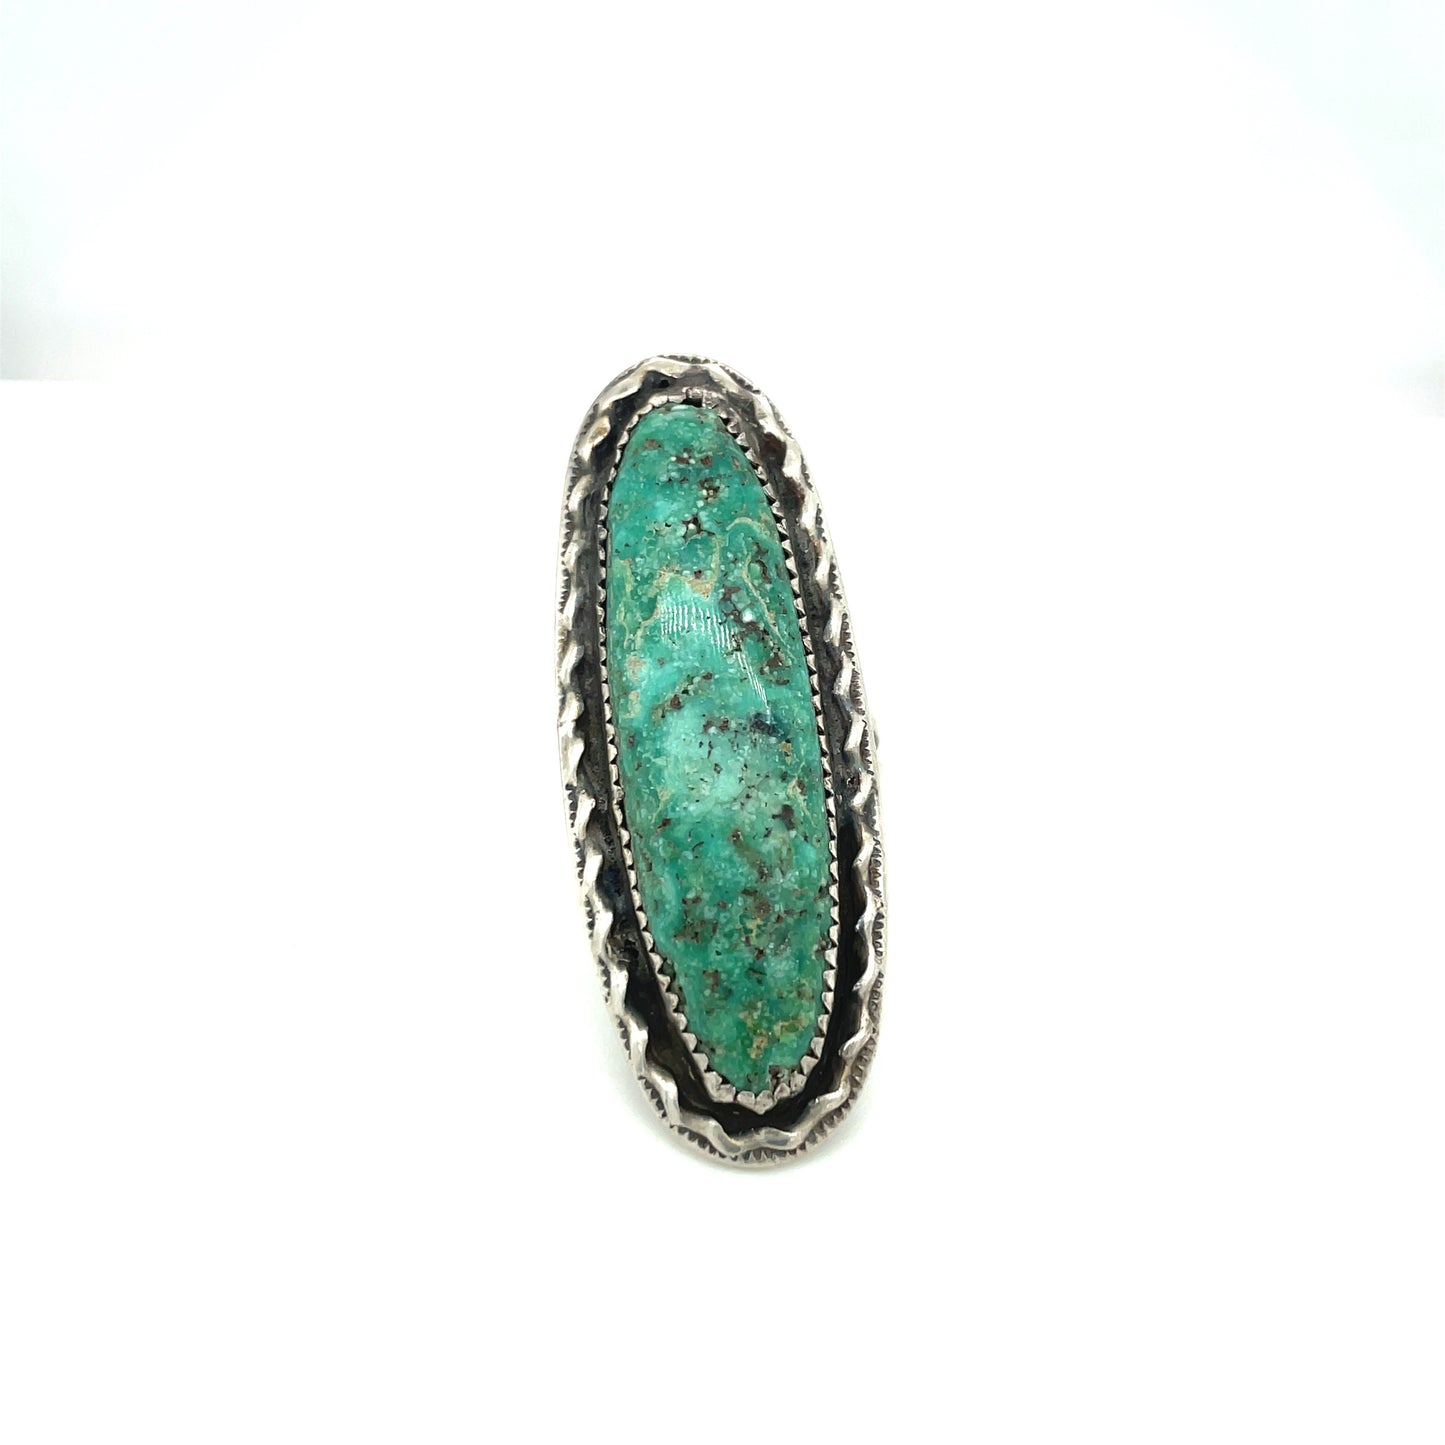 Nevada Turquoise Sterling Silver Ring Size 7 1/2